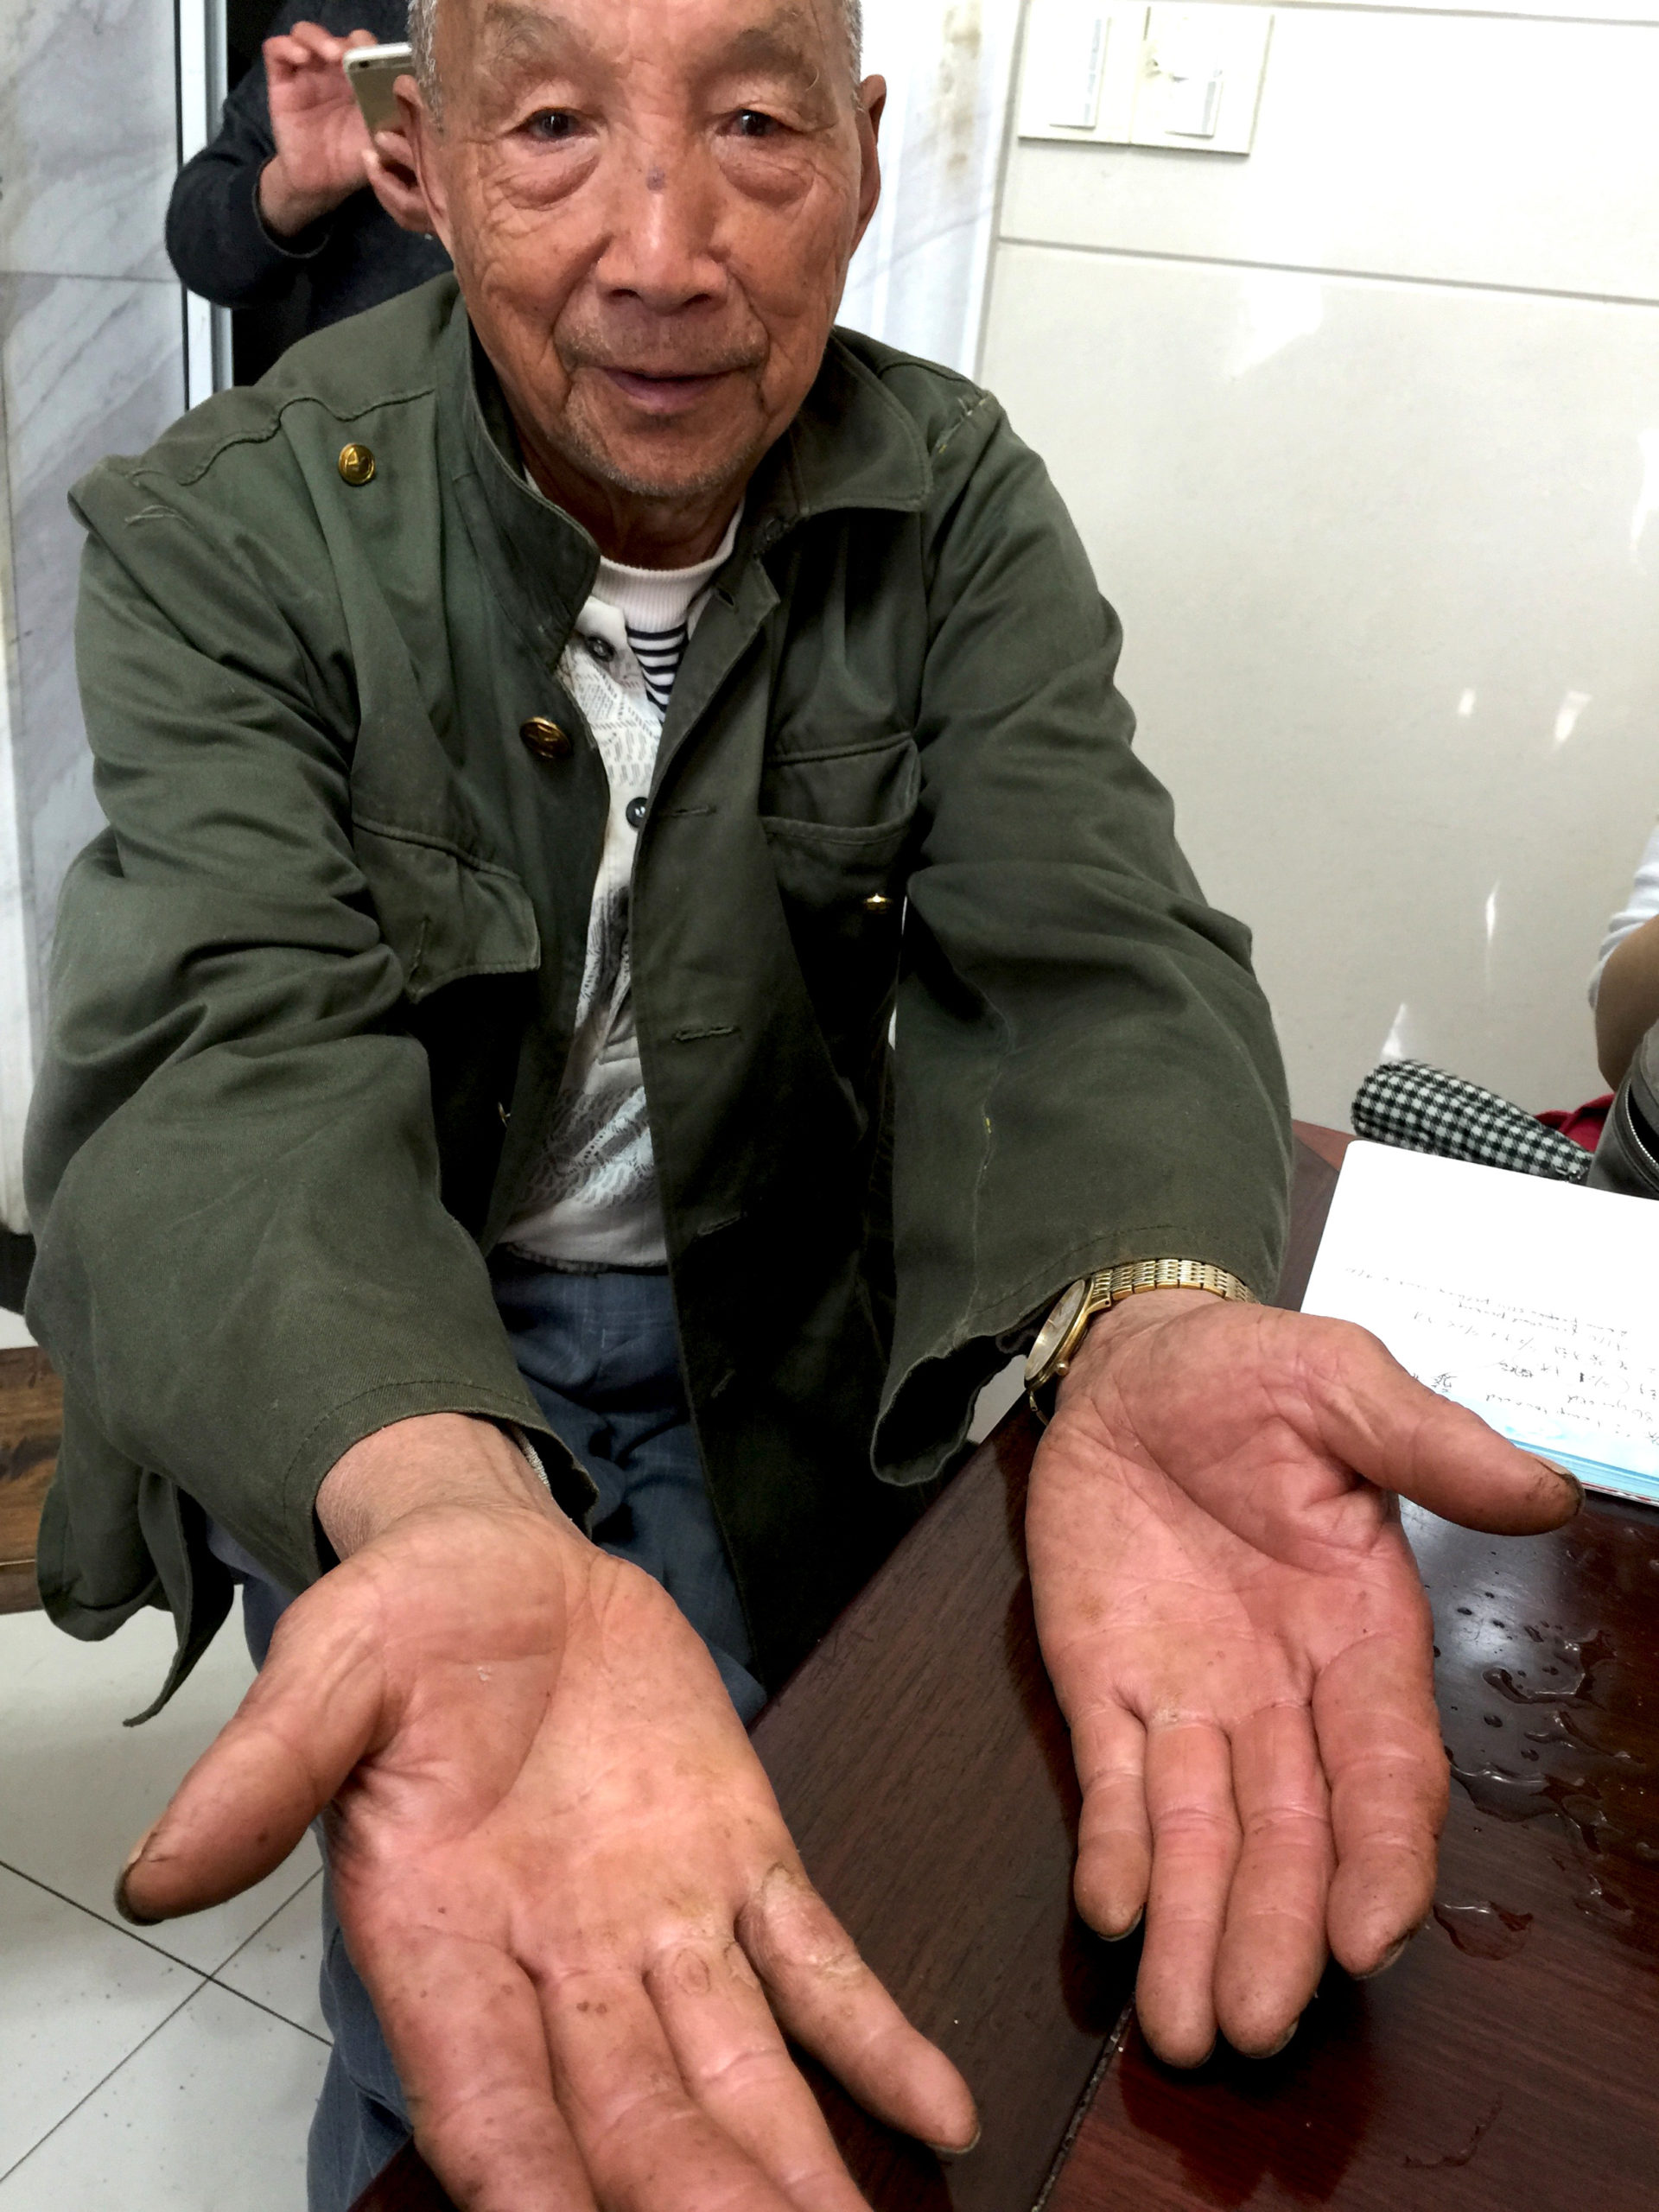 A faintly smiling elderly man extending his hands toward the viewer to show his upturned hands. The palms and fingers are thick with calluses, especially his right hand.